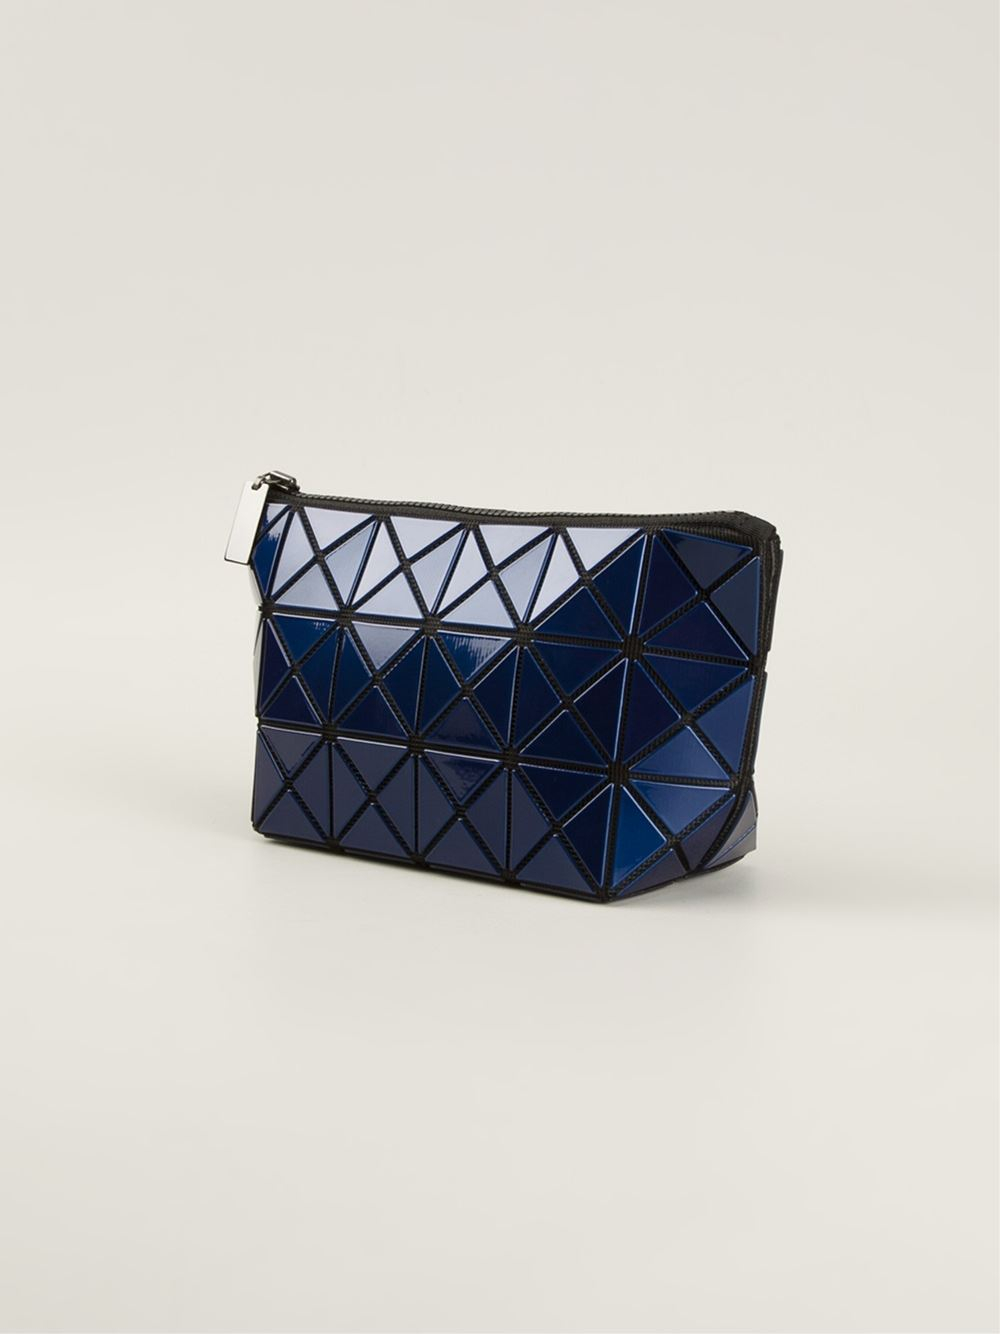 Lyst - Bao Bao Issey Miyake Lucent Clutch in Blue